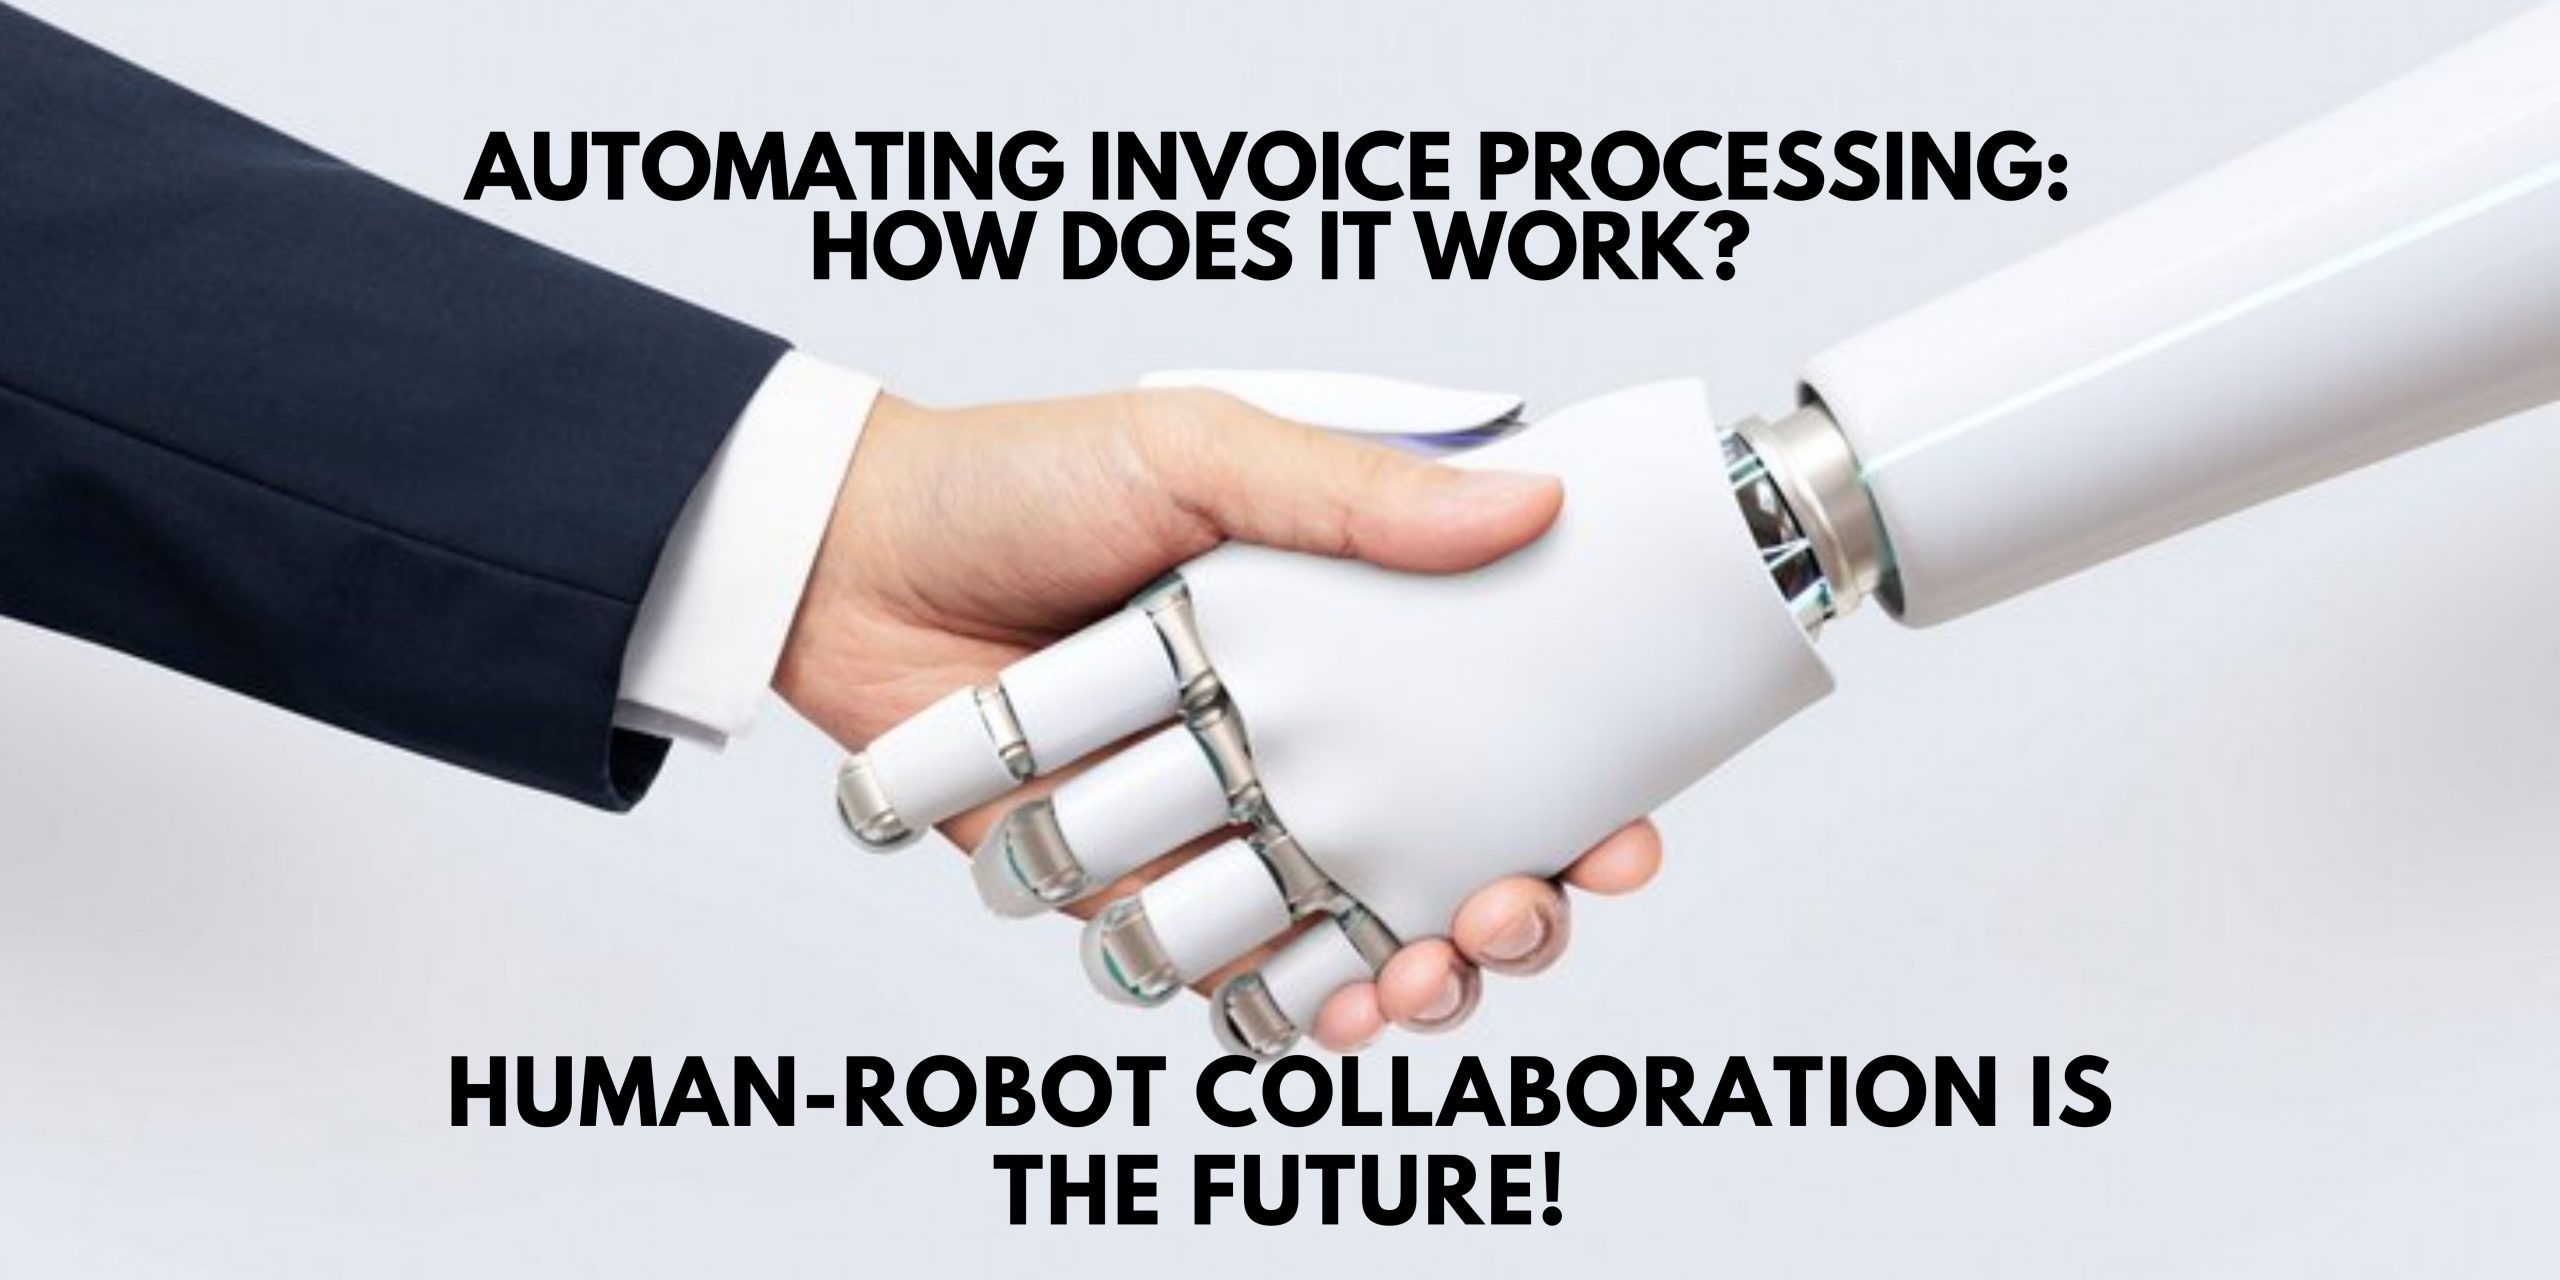 Human-robot collaboration is the future! (2)